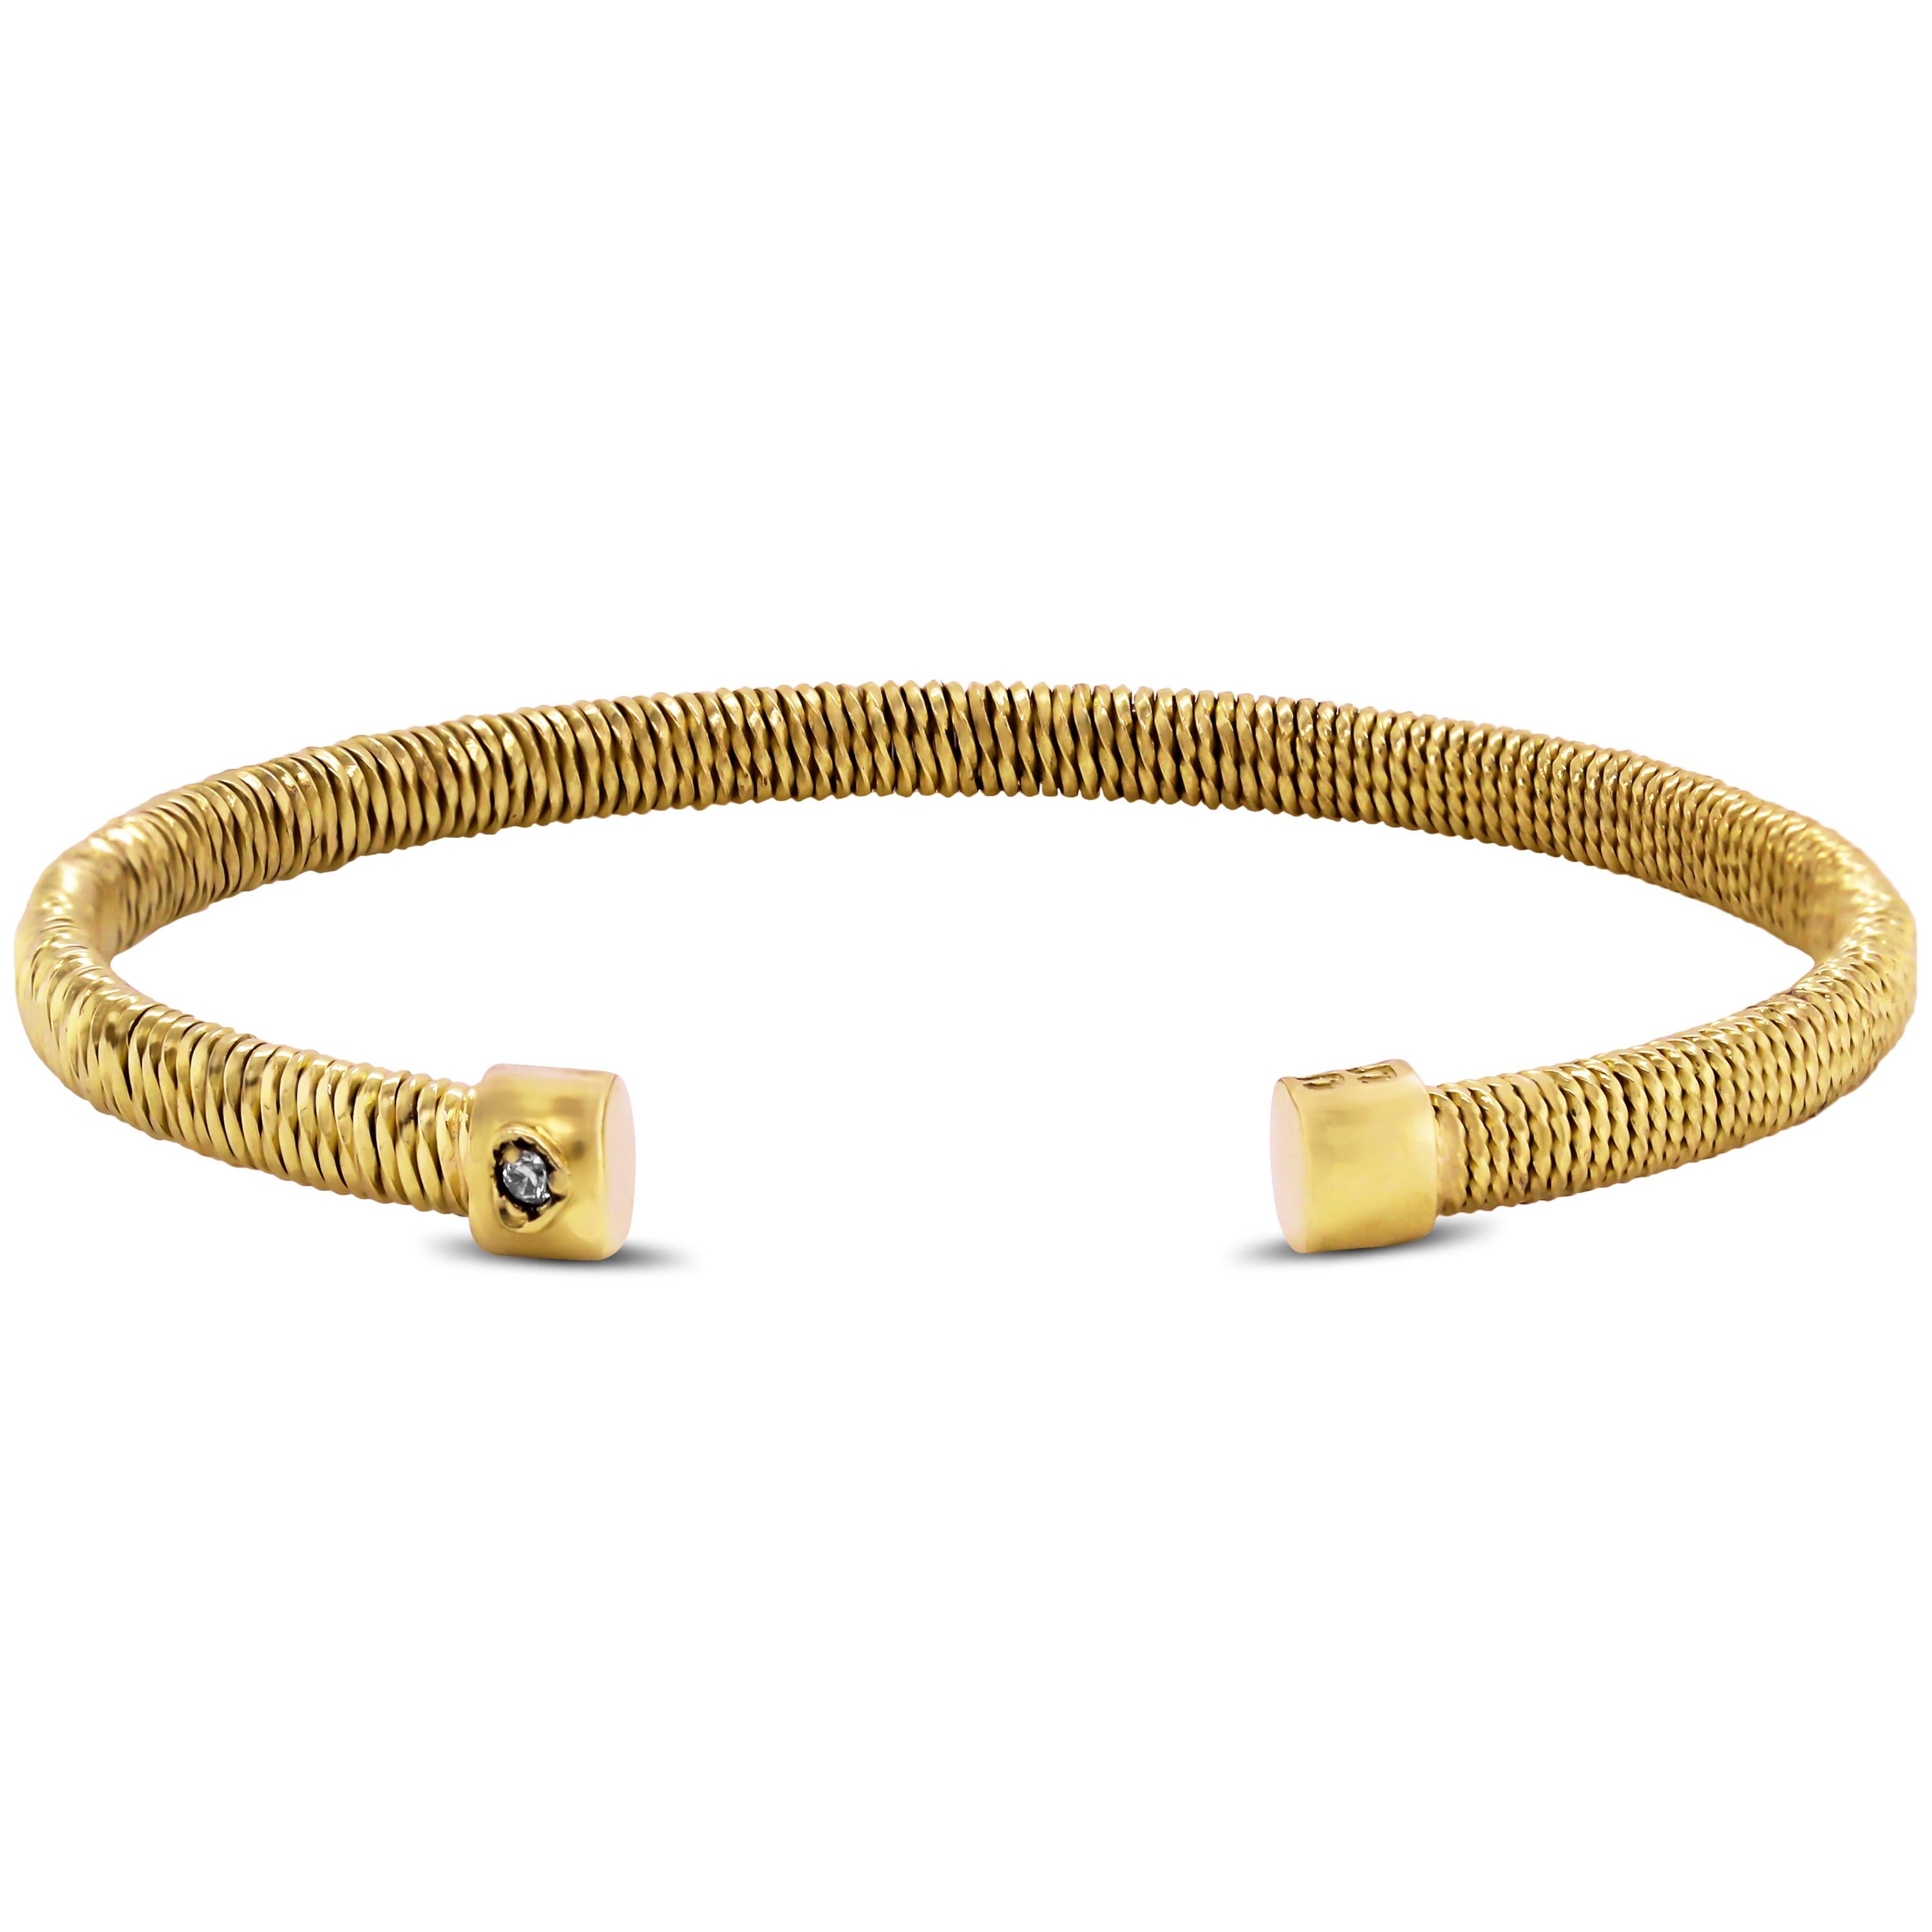 18K Yellow Gold Thin Bangle Bracelet by Stambolian

This bracelet features high-polshed, woven-like textured gold that makes up the bracelet entirely

Bracelet is a size 7. 5mm width

Signed Stambolian and has the Trademark 